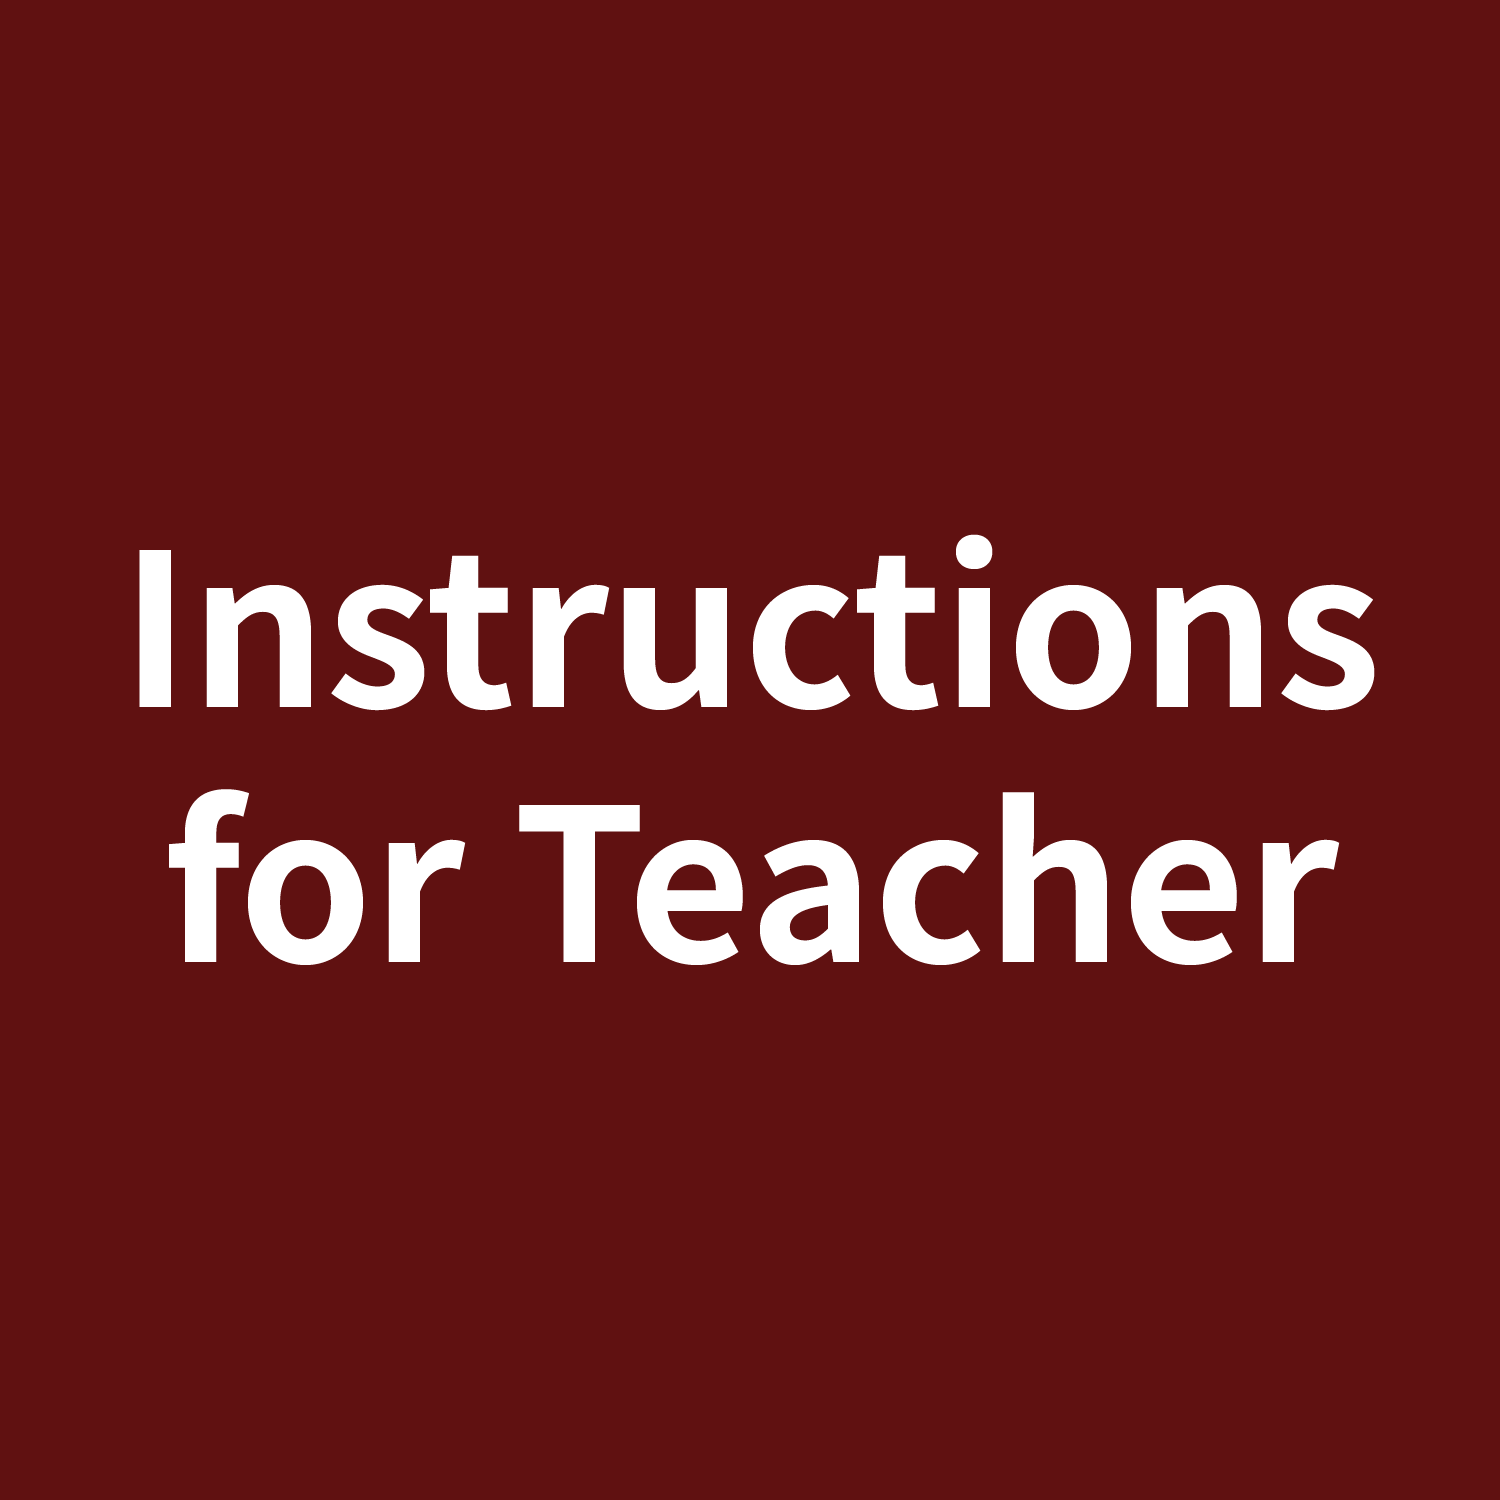 Common Operational Issues for Teachers